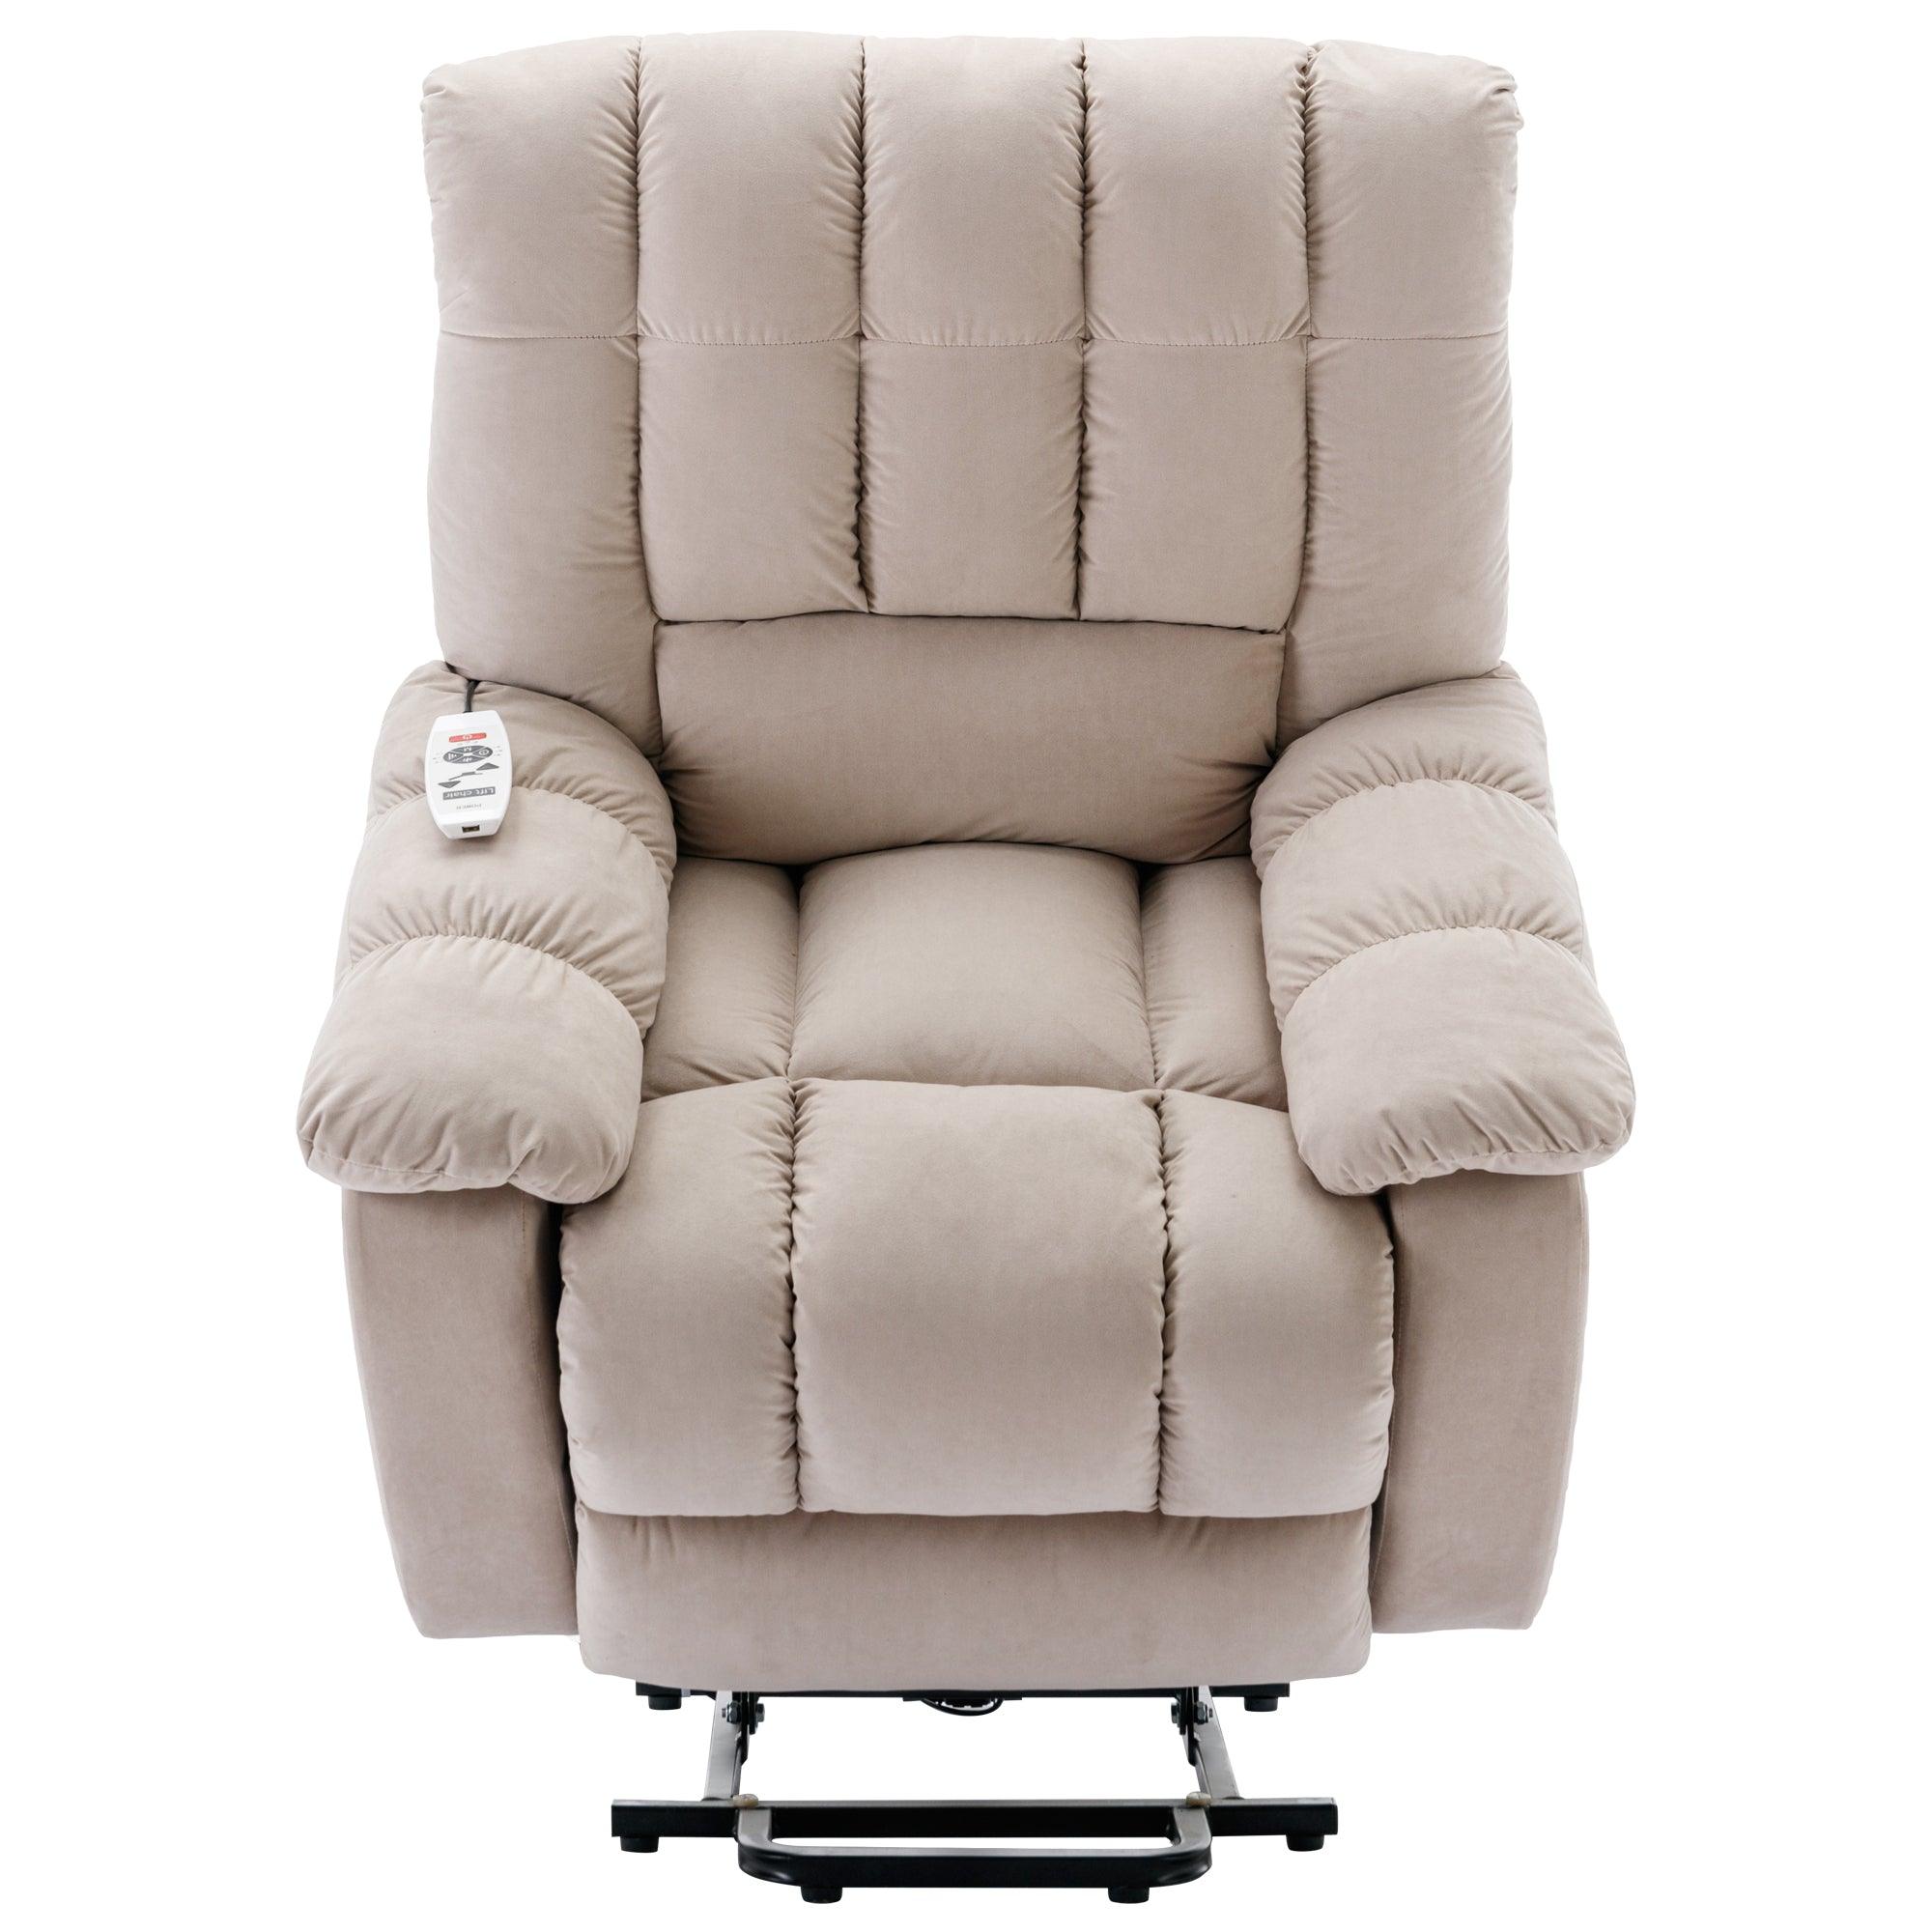 Beige Massage Lift Chair Recliner, front view lifted